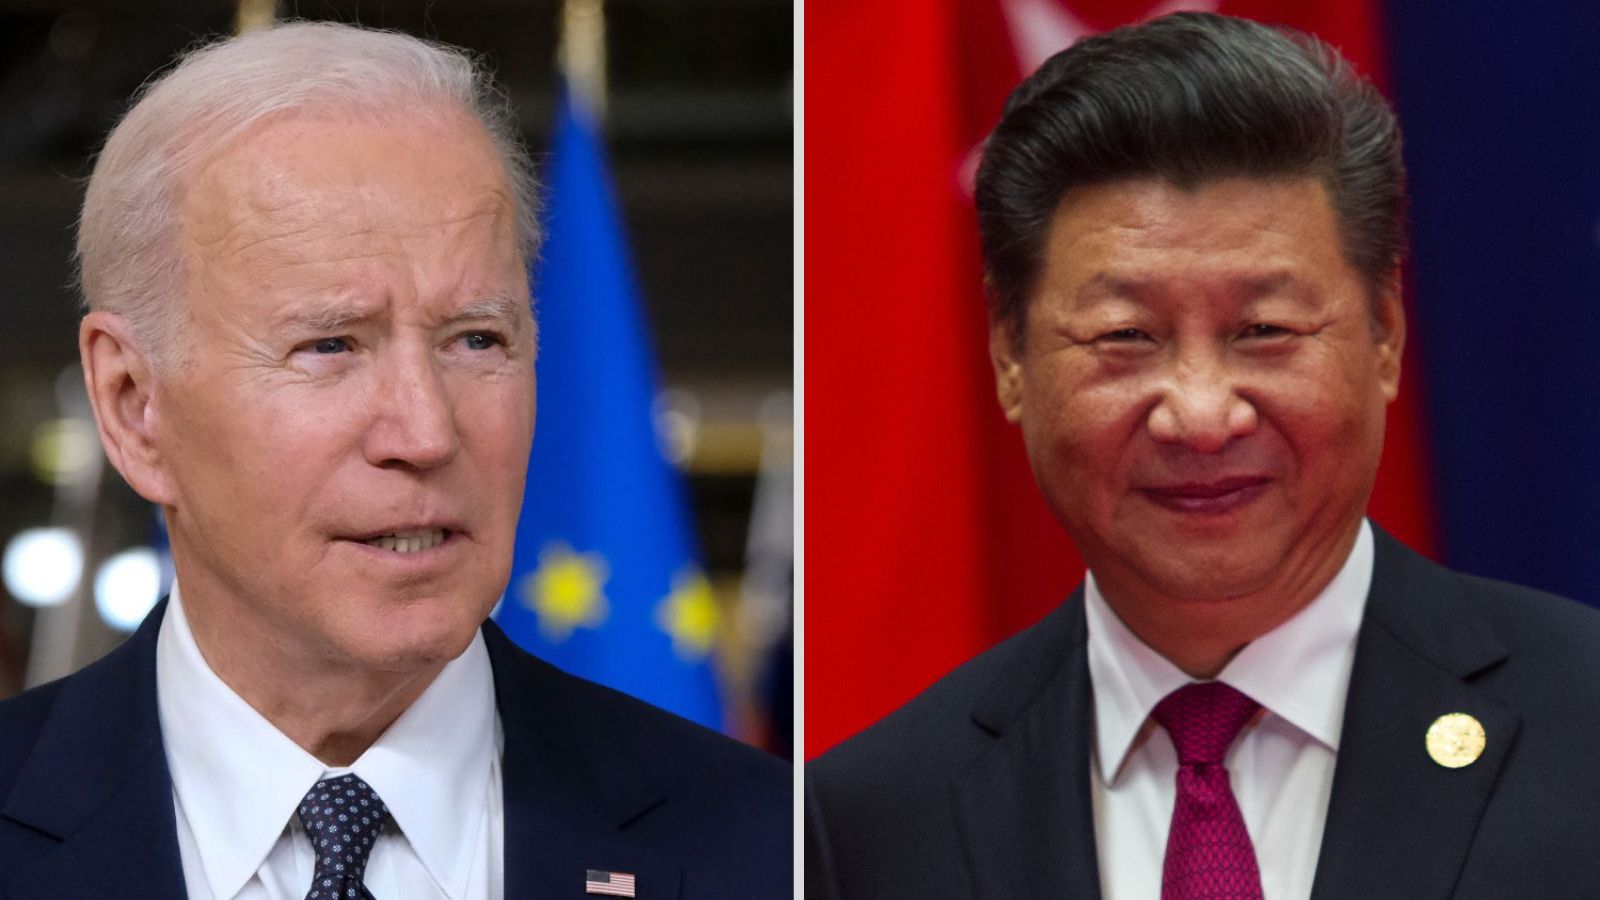 Biden Has “Turned Our Foreign Policy to China First, America Last”: Experts Criticize New Climate Change Agreement Between the US and China